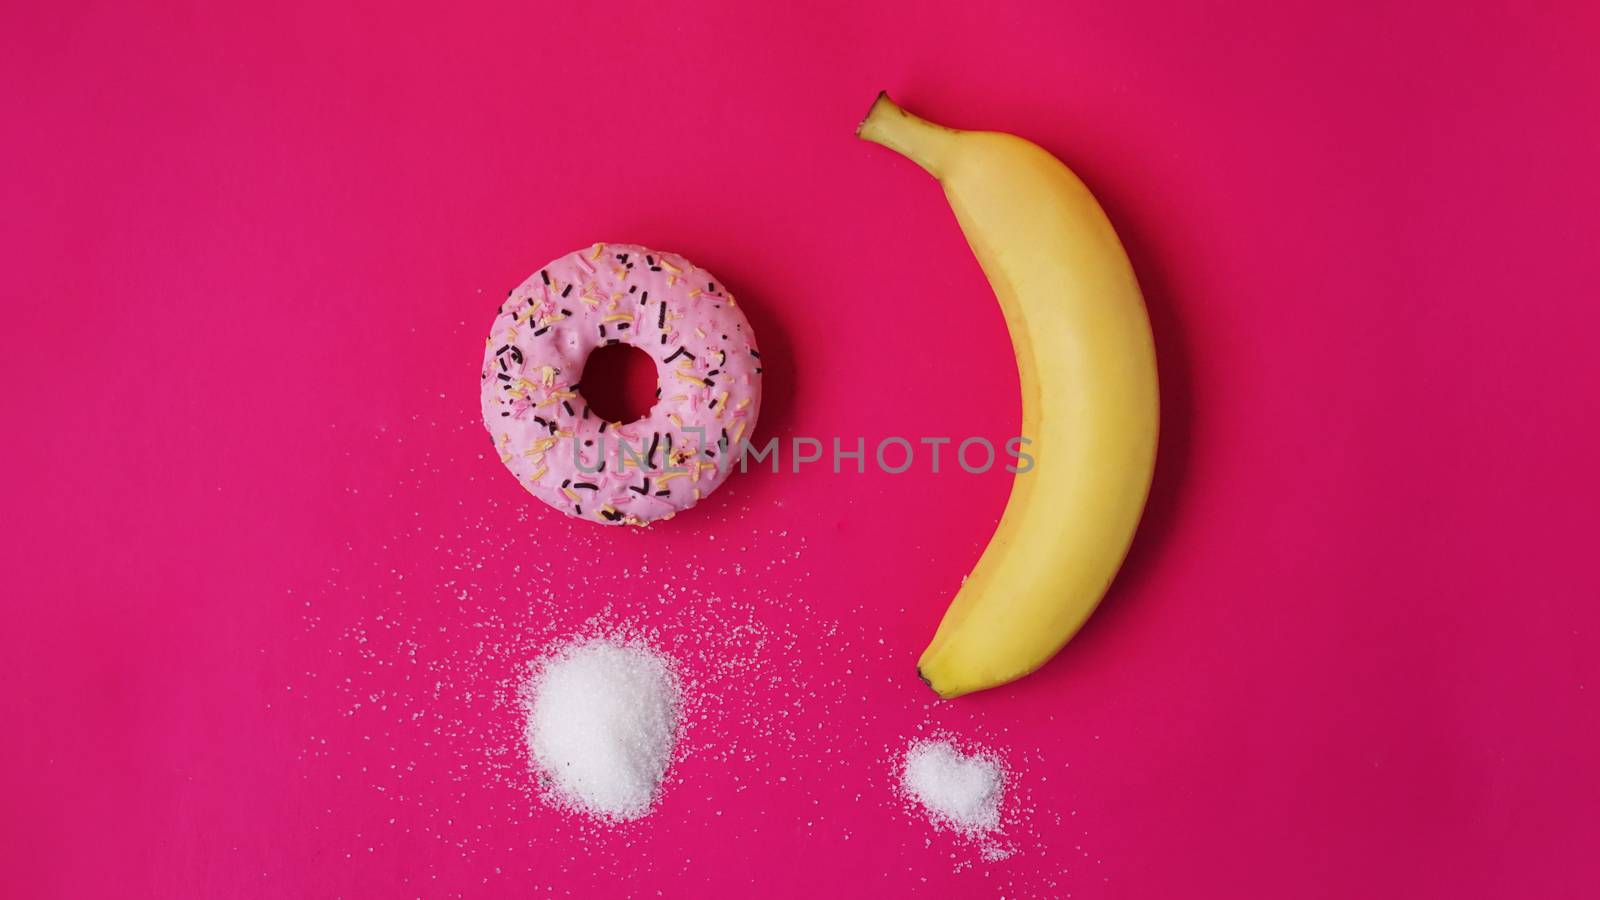 Choice donut against banana - sugar and calories in foods. Starting healthy eating or junk food. Pink background